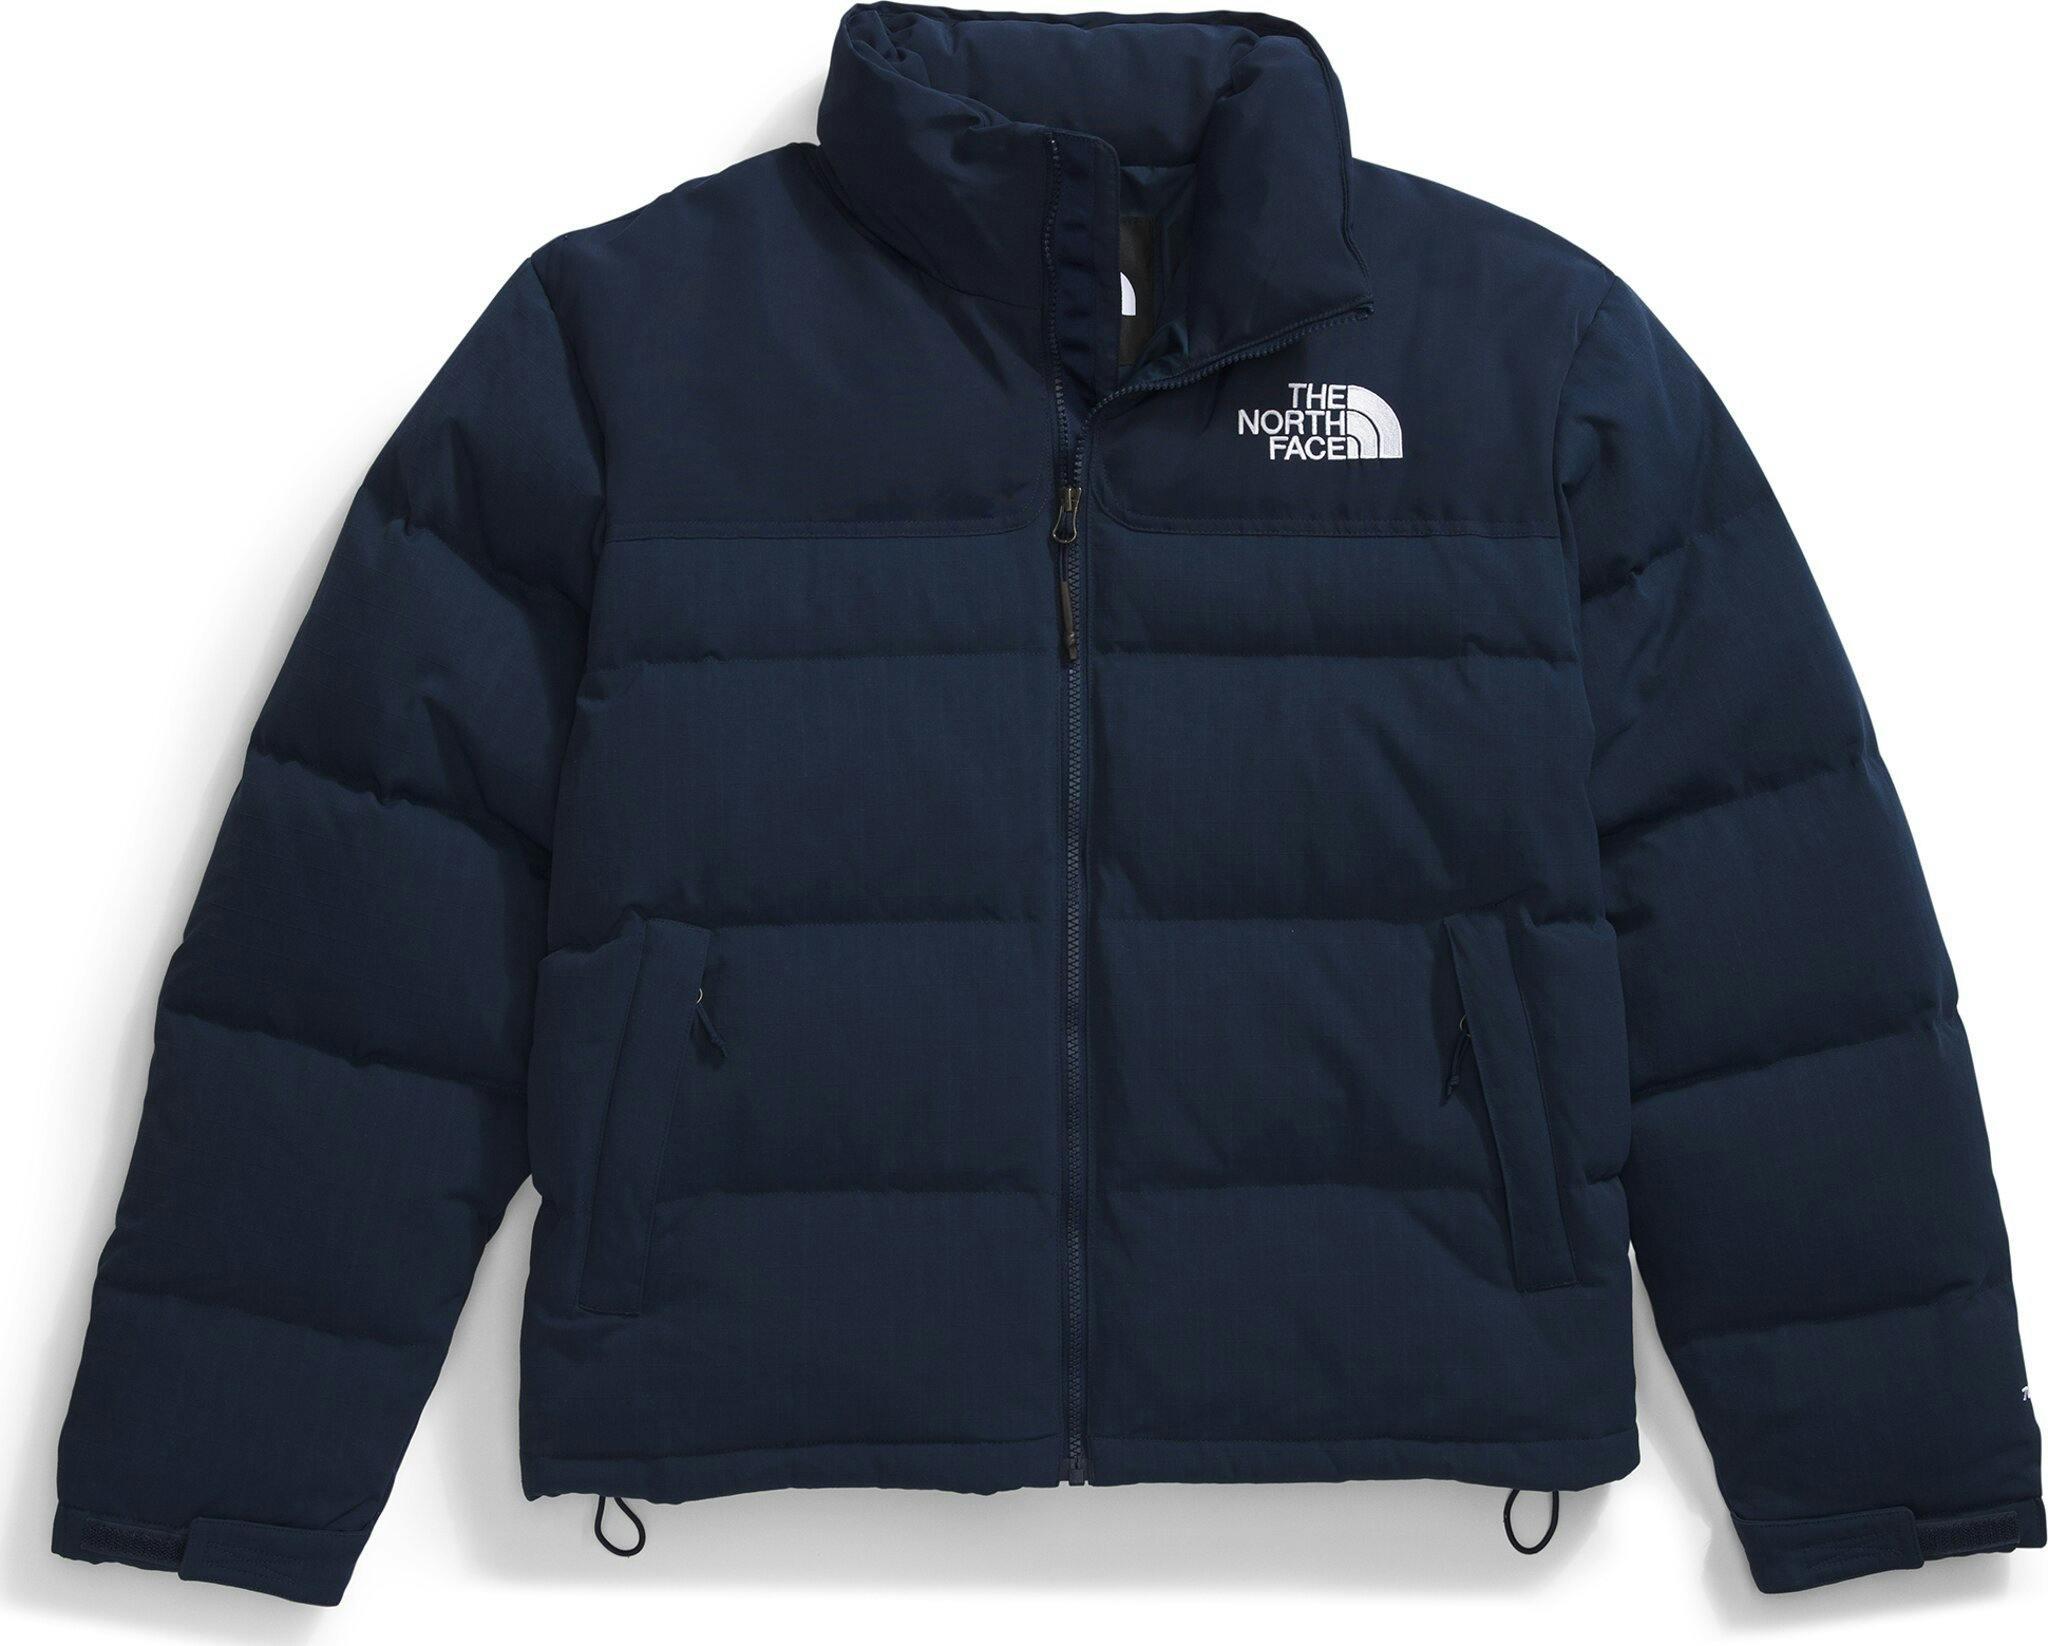 Product image for 92 Ripstop Nuptse Jacket - Men's